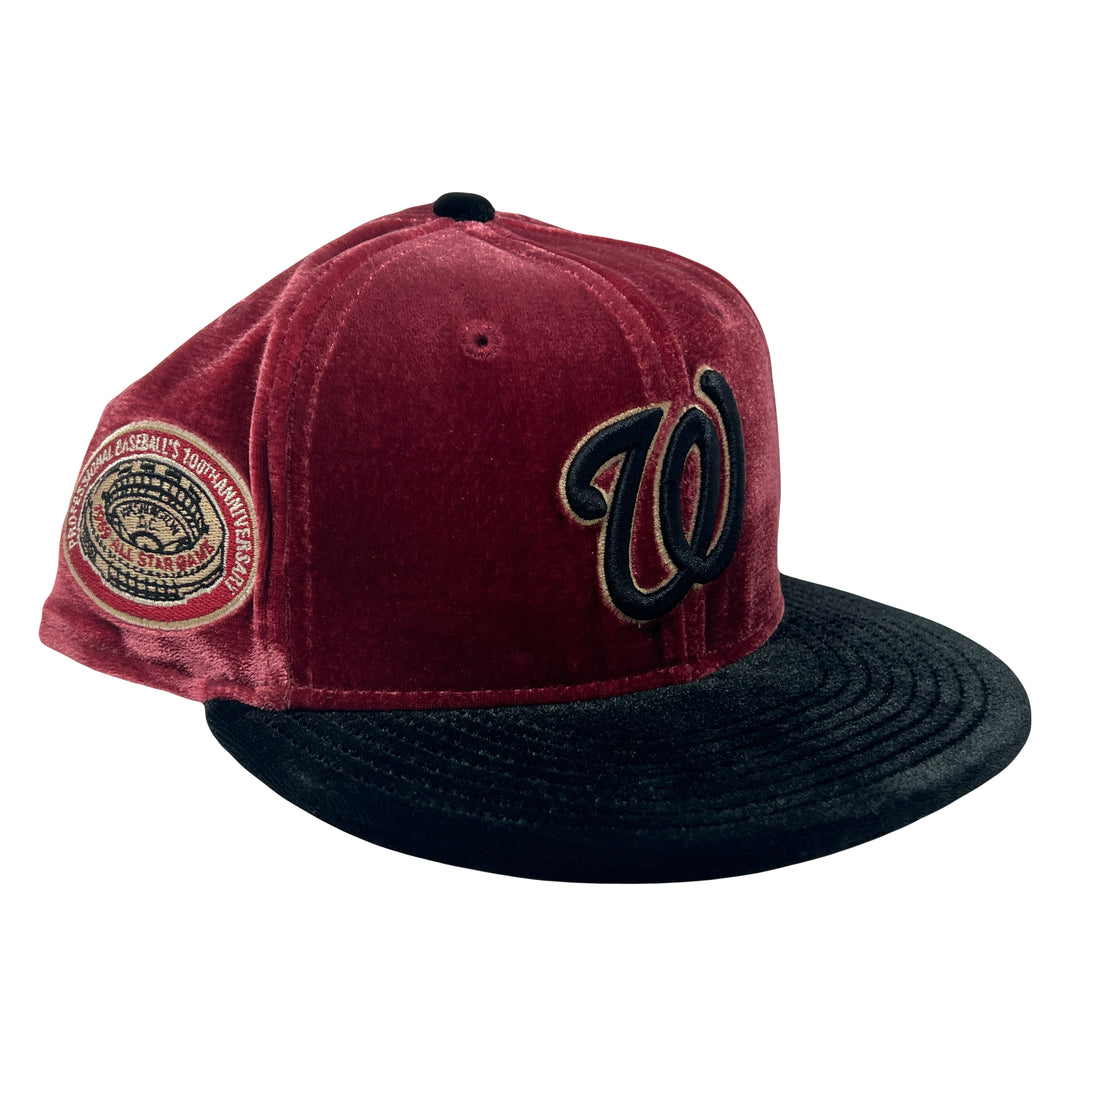 Washington Nationals 1962 All Star Game Velvet Collection New Era Fitted Hat